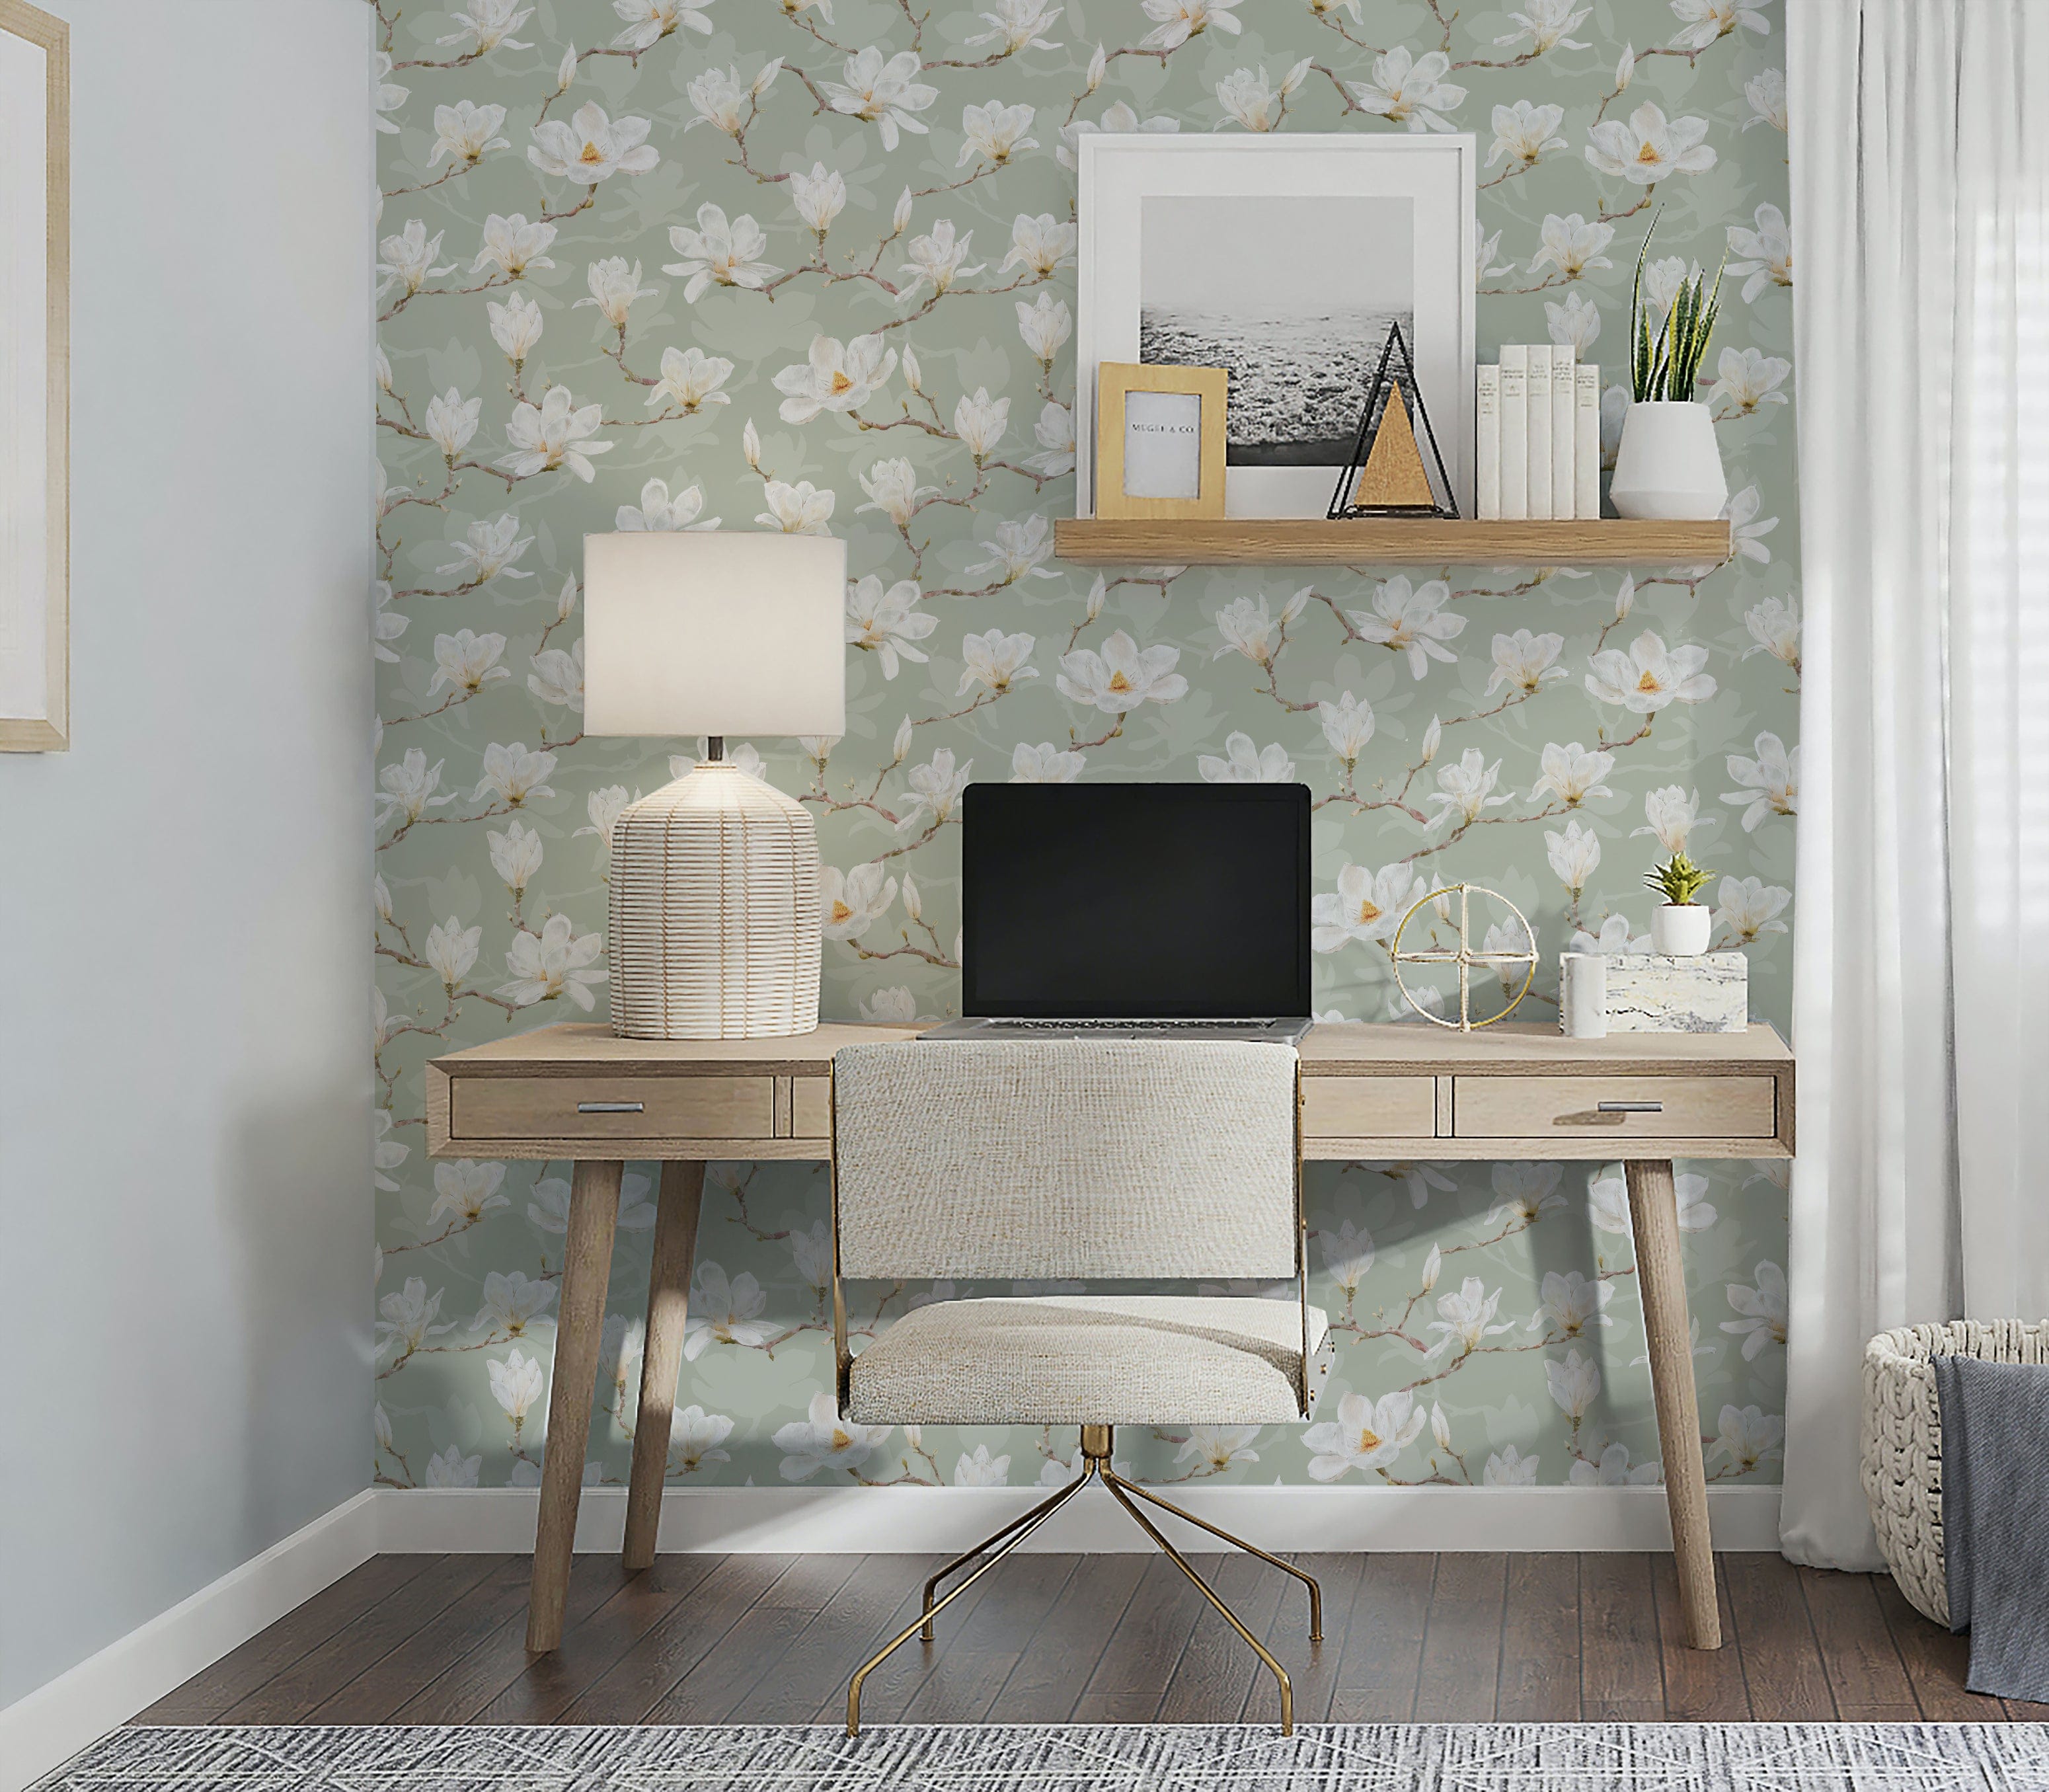 A tastefully decorated home office with the Watercolour Magnolia Wallpaper, showcasing elegant white magnolia blossoms on a pale green background, providing a serene and inspiring environment for work and creativity, accented by natural wood furniture and soft lighting.